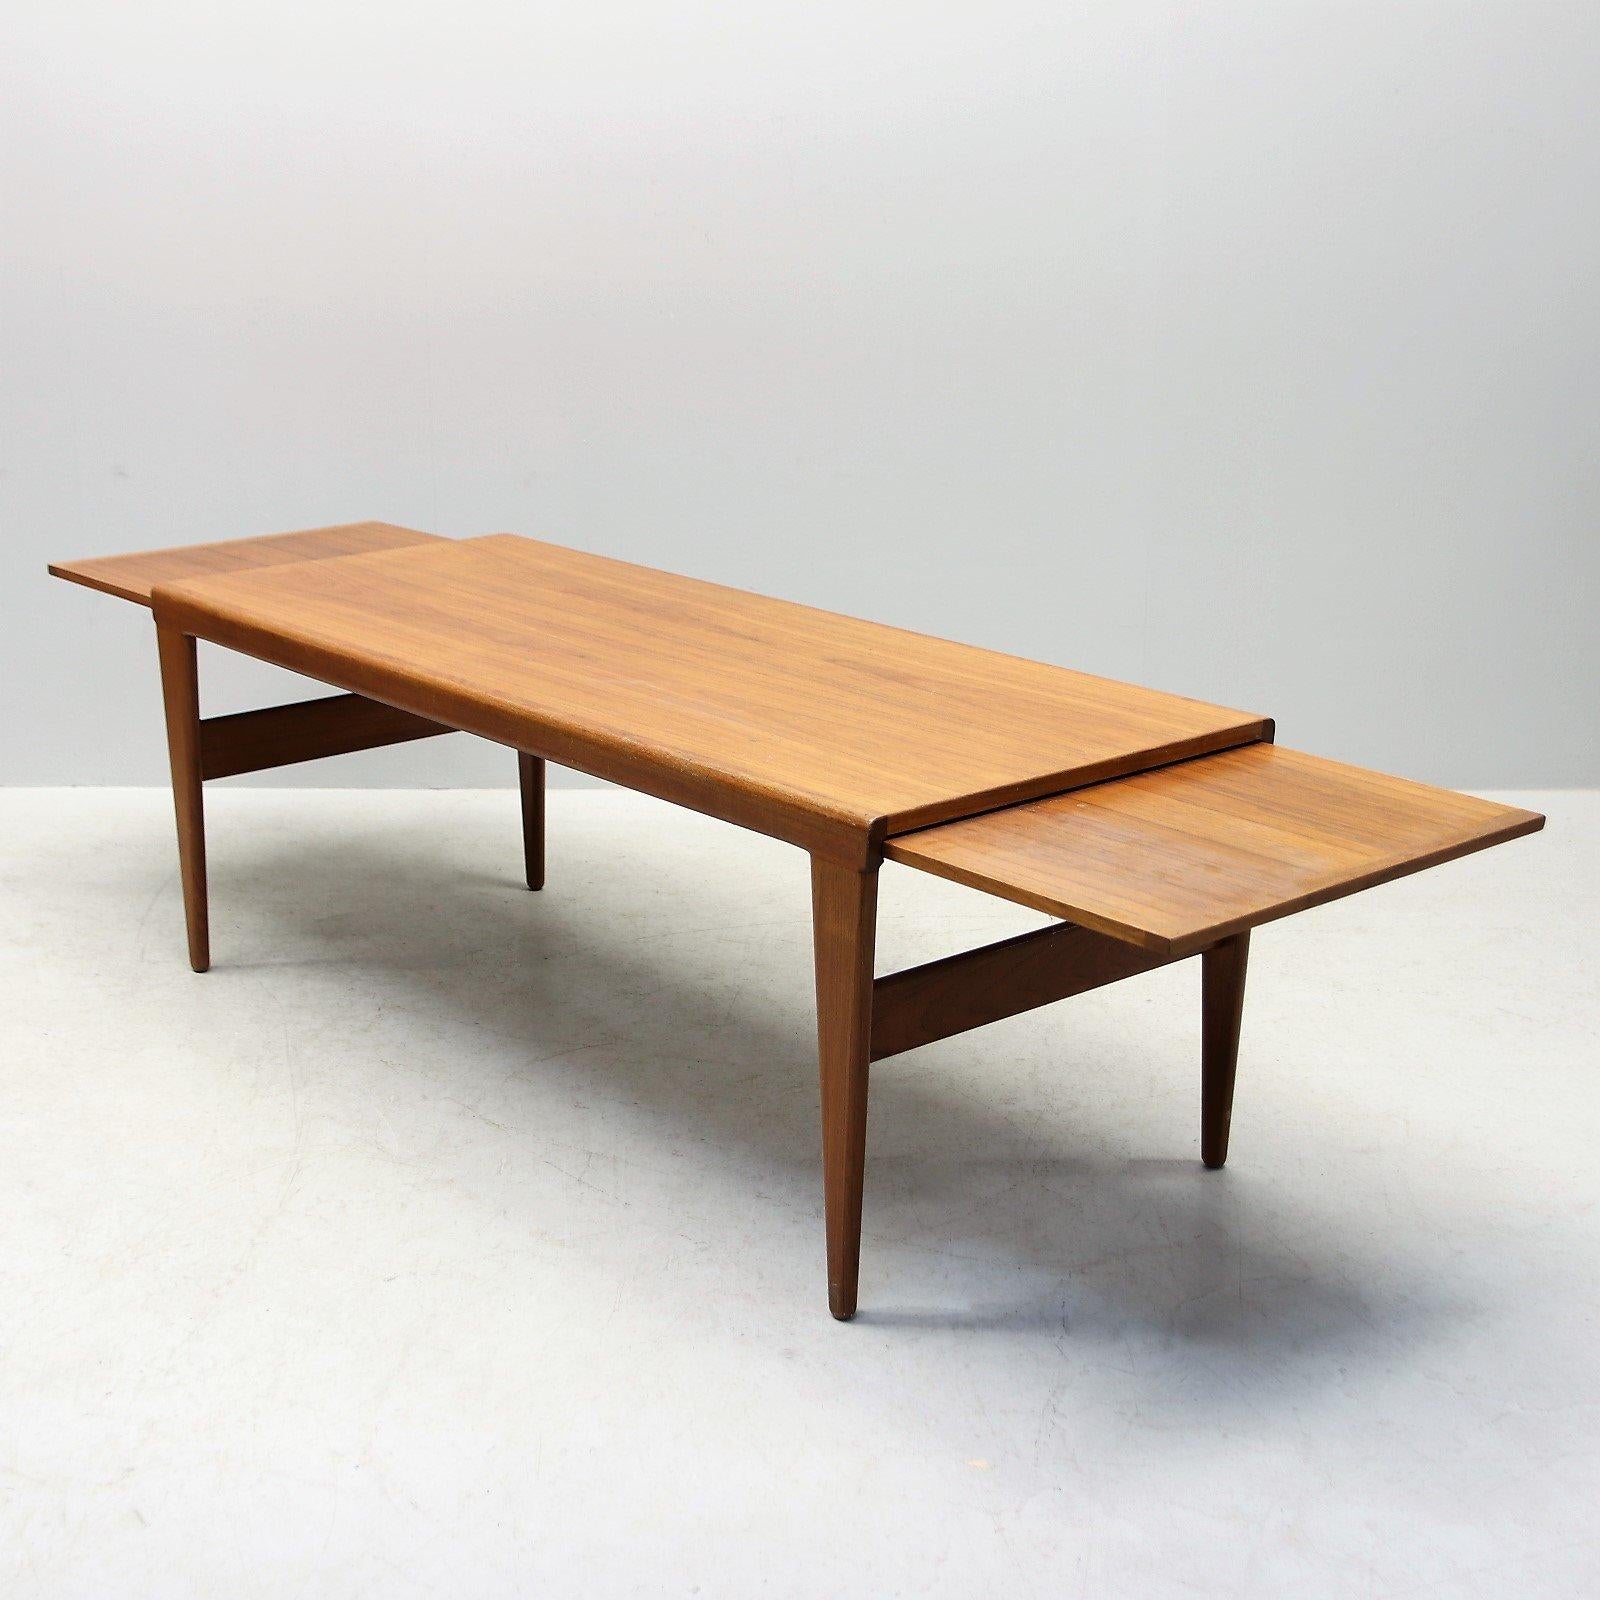 Sleek, sophisticated and somewhat surprising. This mid-1960s teak coffee table by famous Danish designer Kai Kristiansen is the epitome of midcentury style. Features two pull-out pieces that extend the surface area. Wear consistent with age and